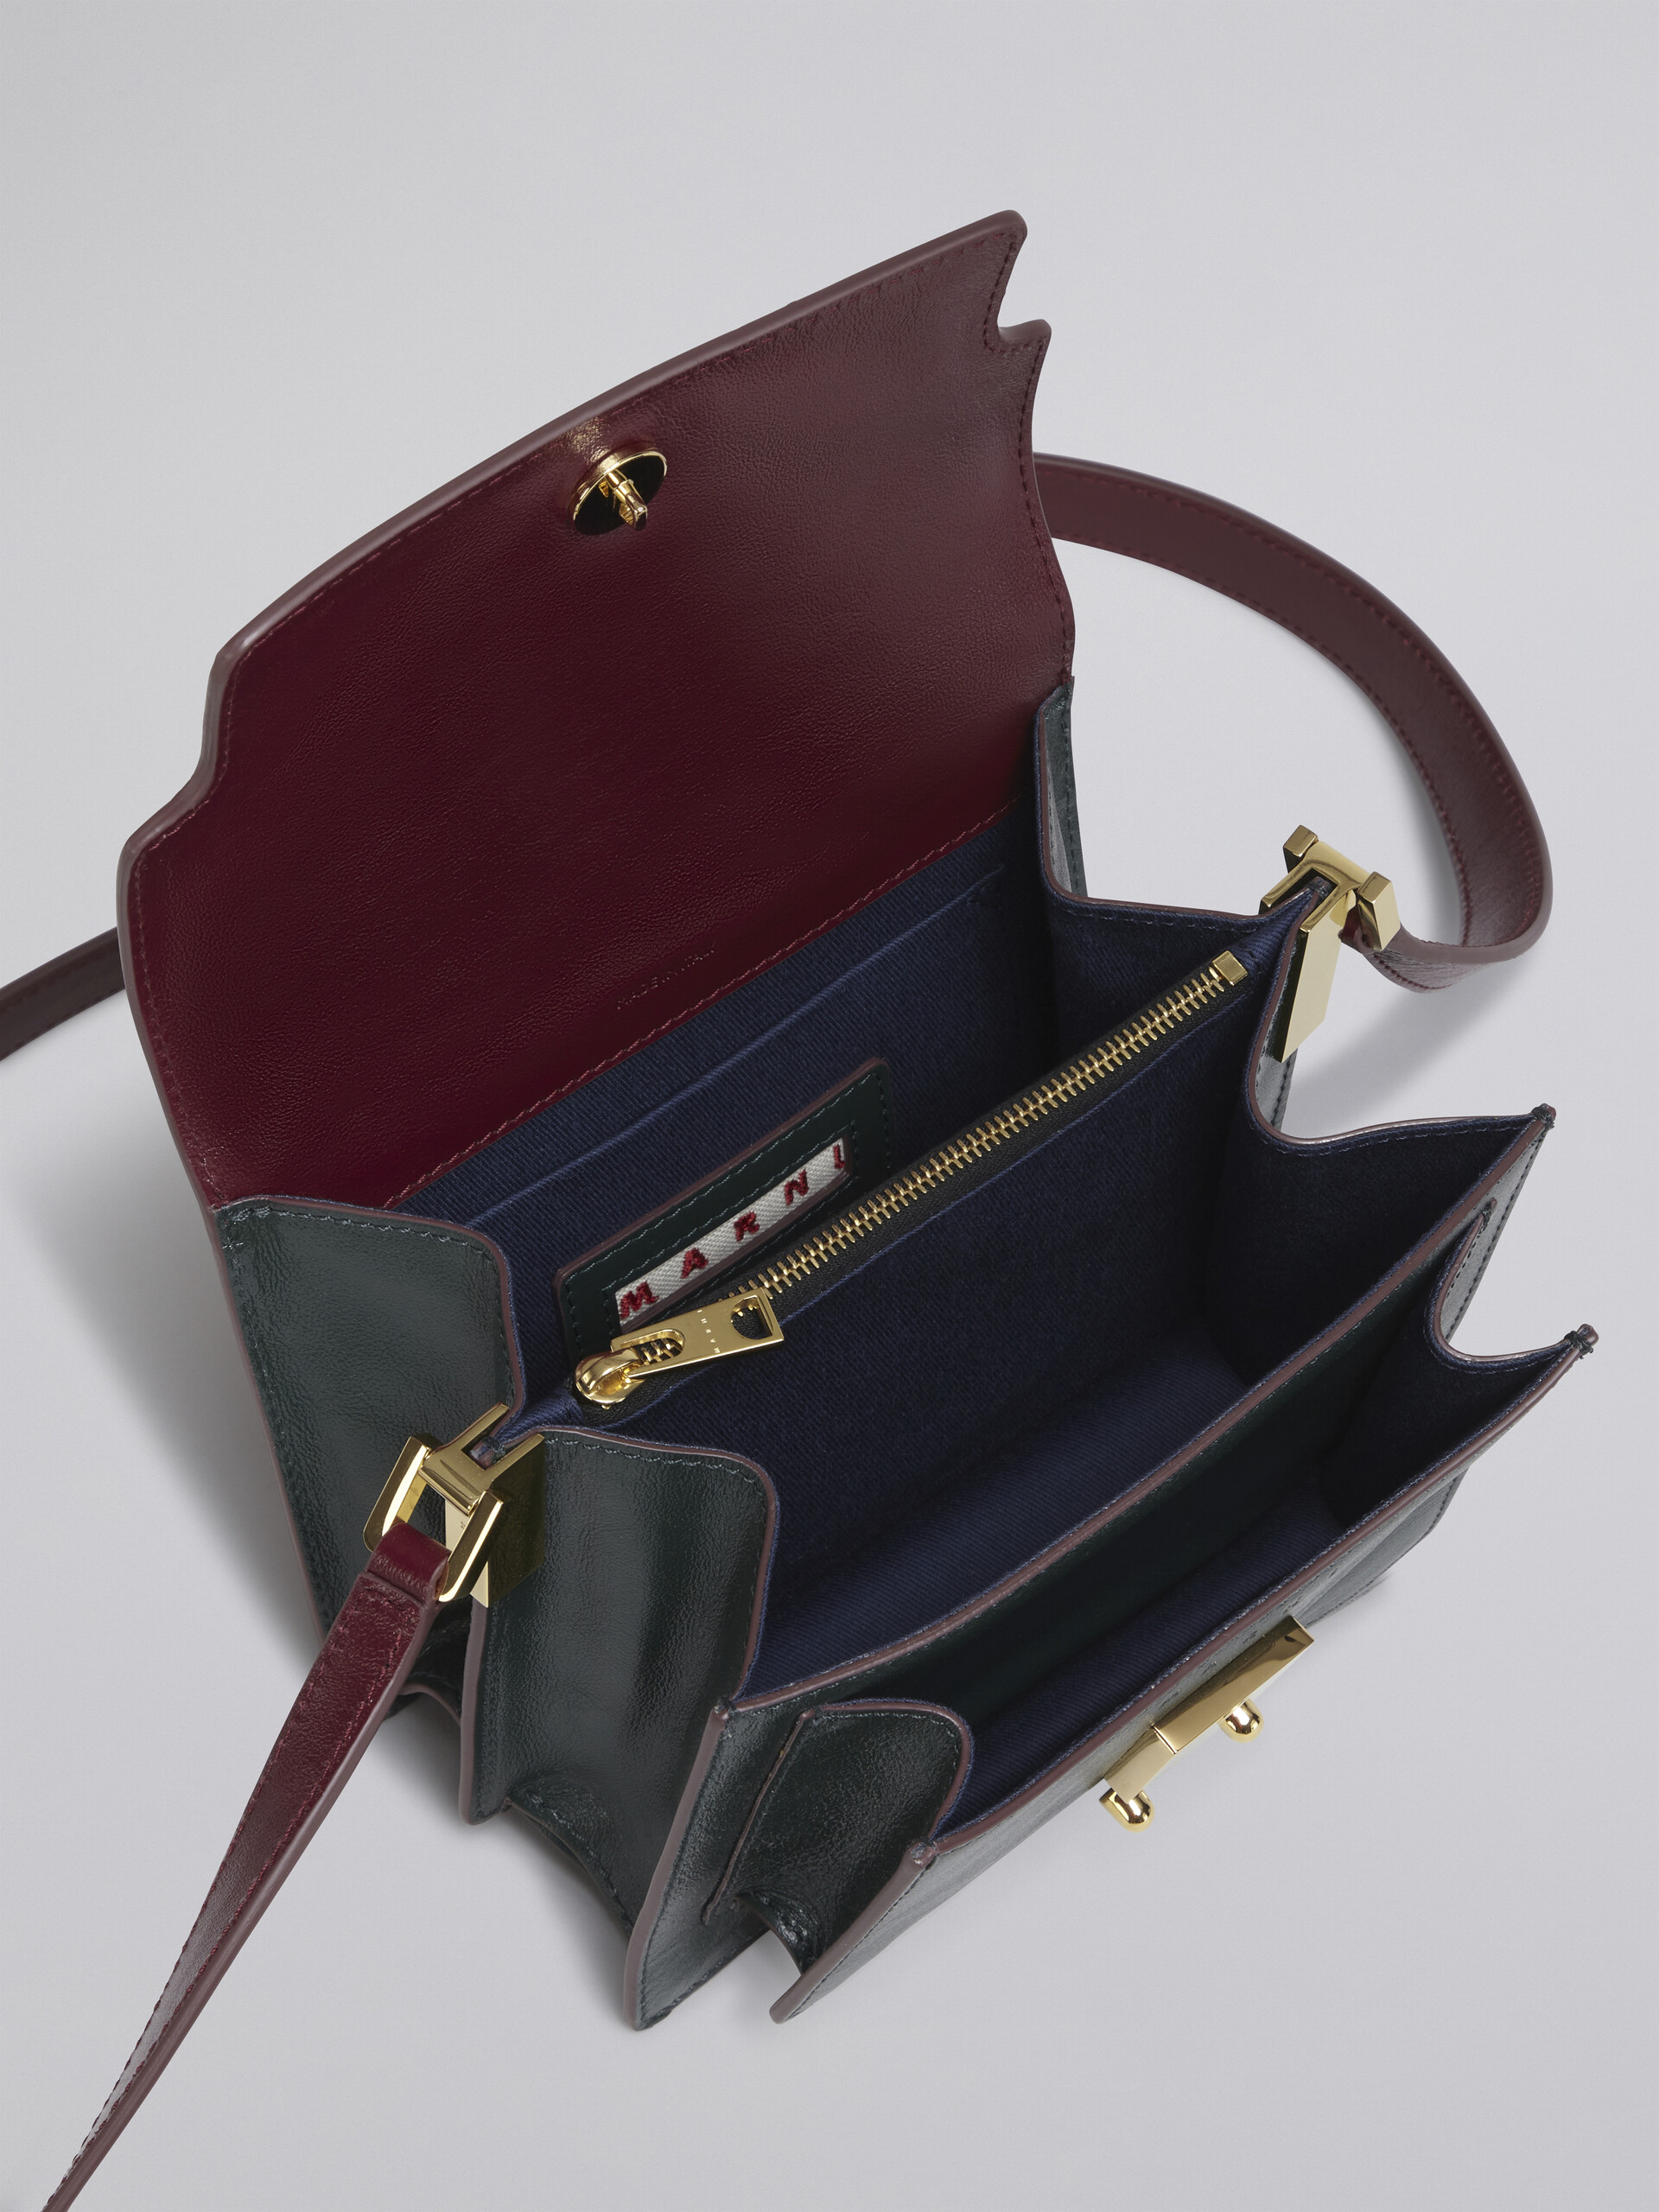 TRUNK SOFT mini bag in green and burgundy leather - Shoulder Bags - Image 3